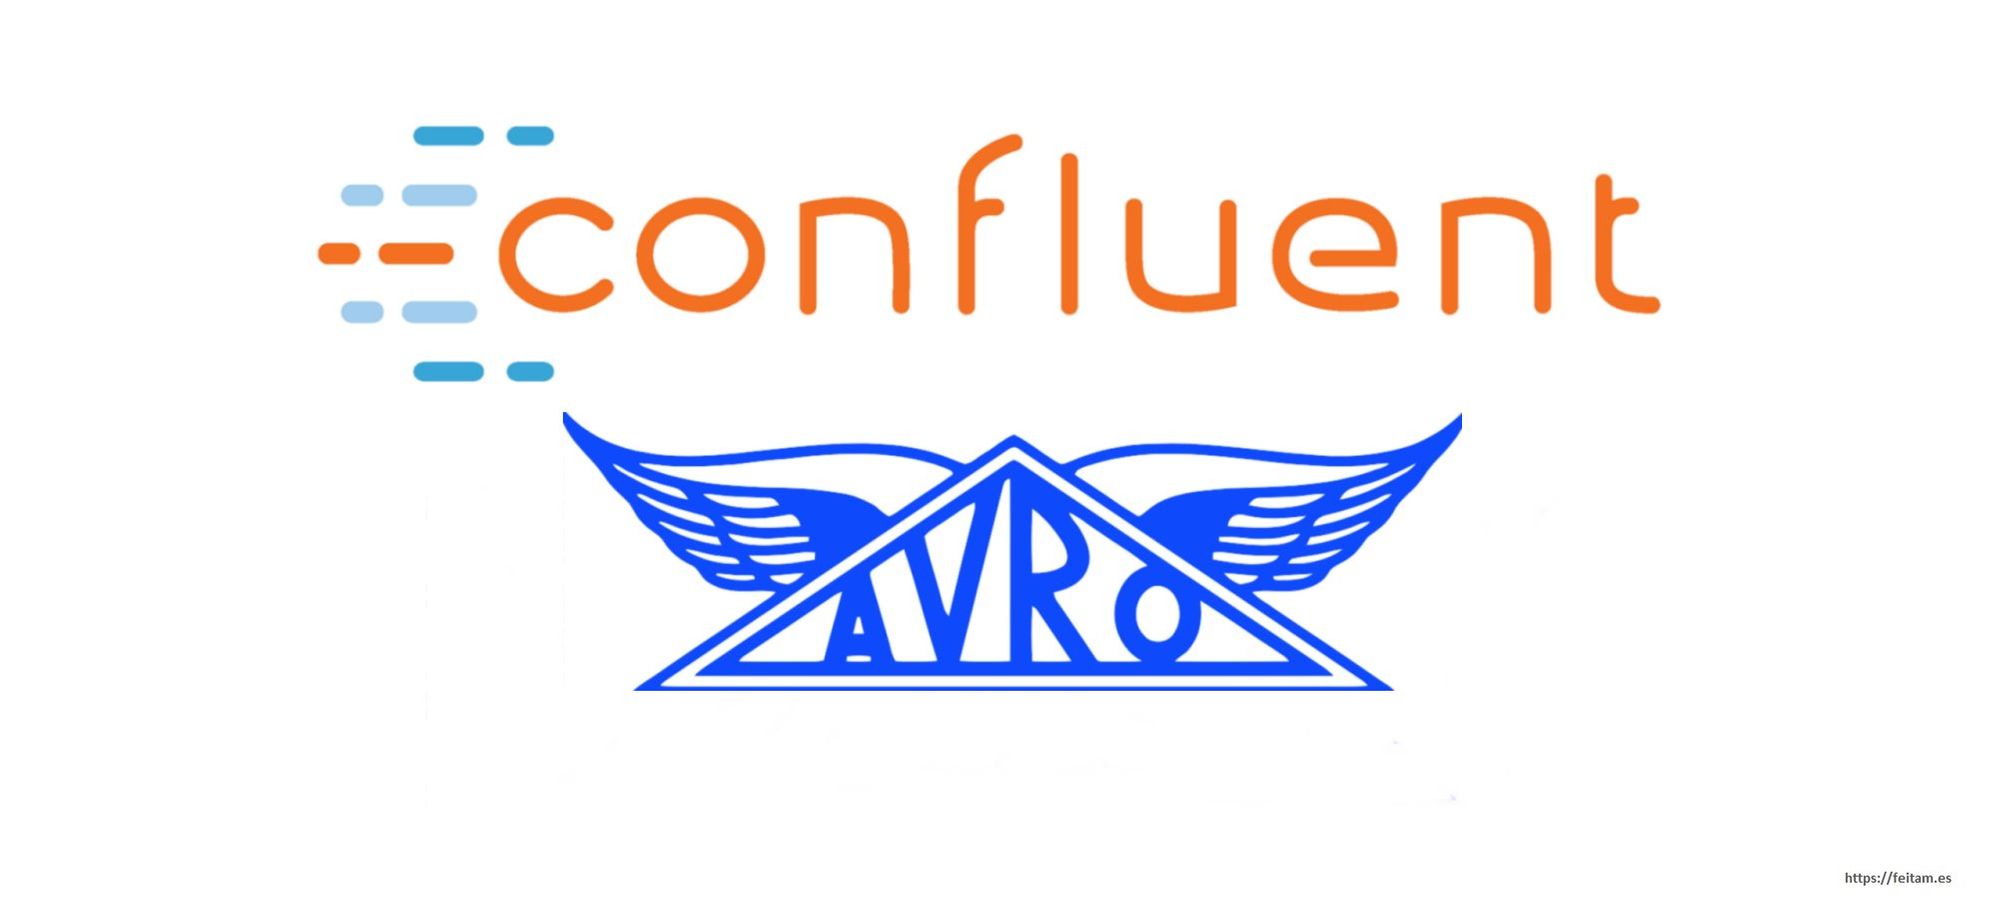 Confluent Kafka Tutorial with Avro: Error Failed to execute goal org.apache.avro:avro-maven-plugin:1.8.2:schema (default) on project java-client-avro-examples: A required class was missing while executing Lorg/apache/avro/Schema$Parser;